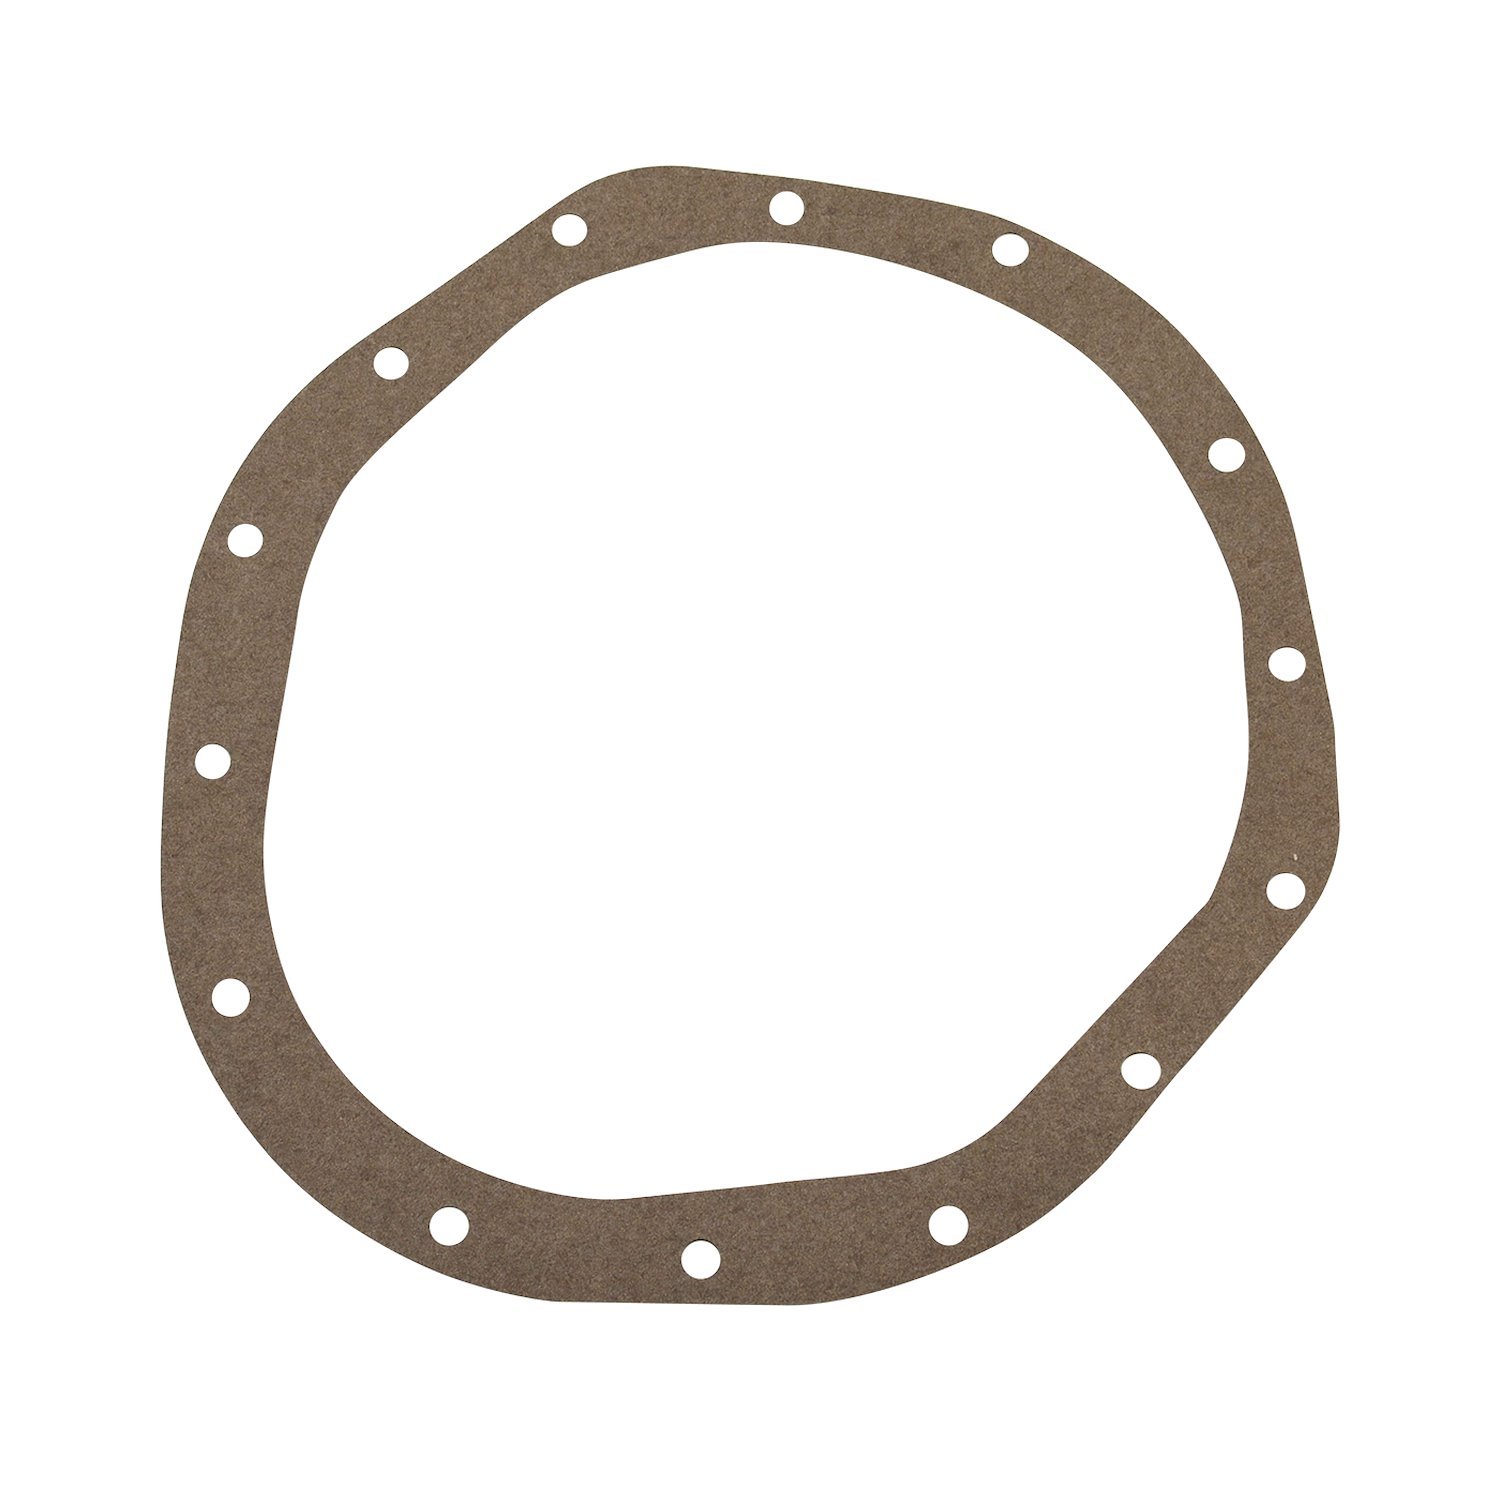 Rear End Cover Gasket GM 9.5"